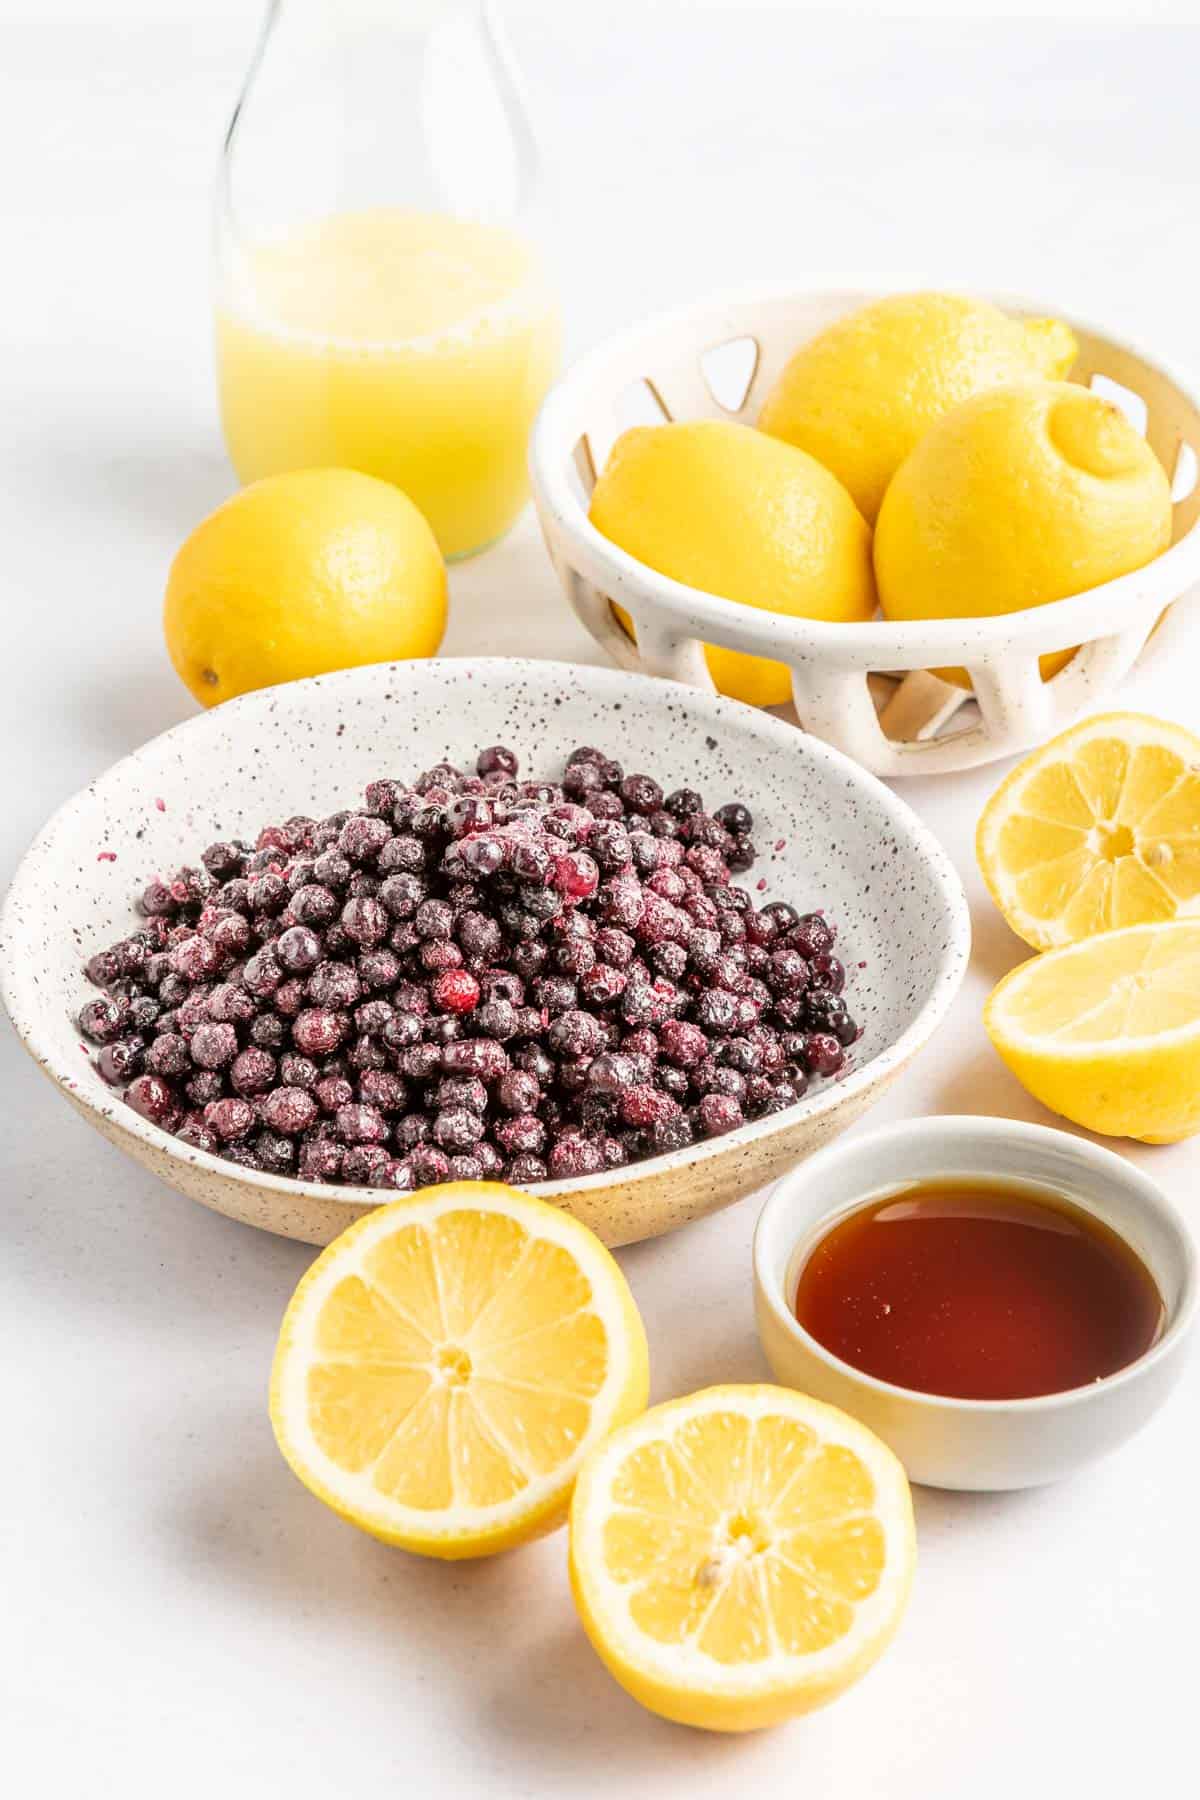 Blueberries in a bowl, maple syrup in a bowl, lemons and lemon juice.